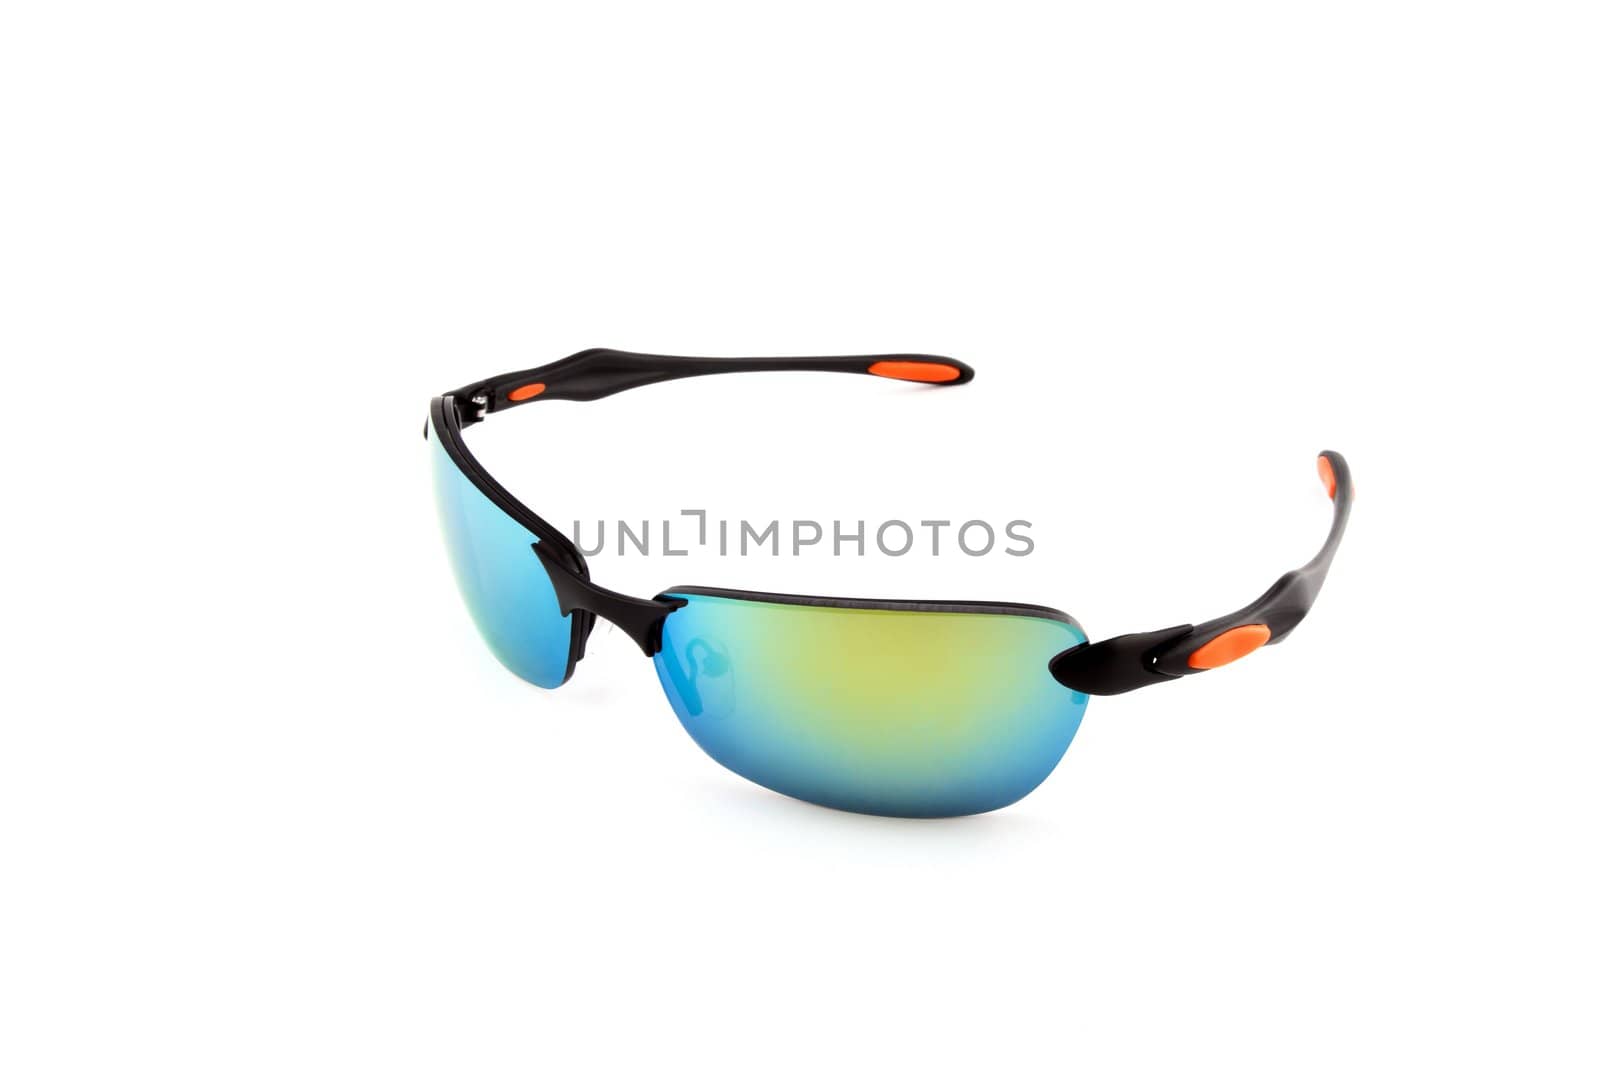 Colorful sunglasses on white background by anikasalsera